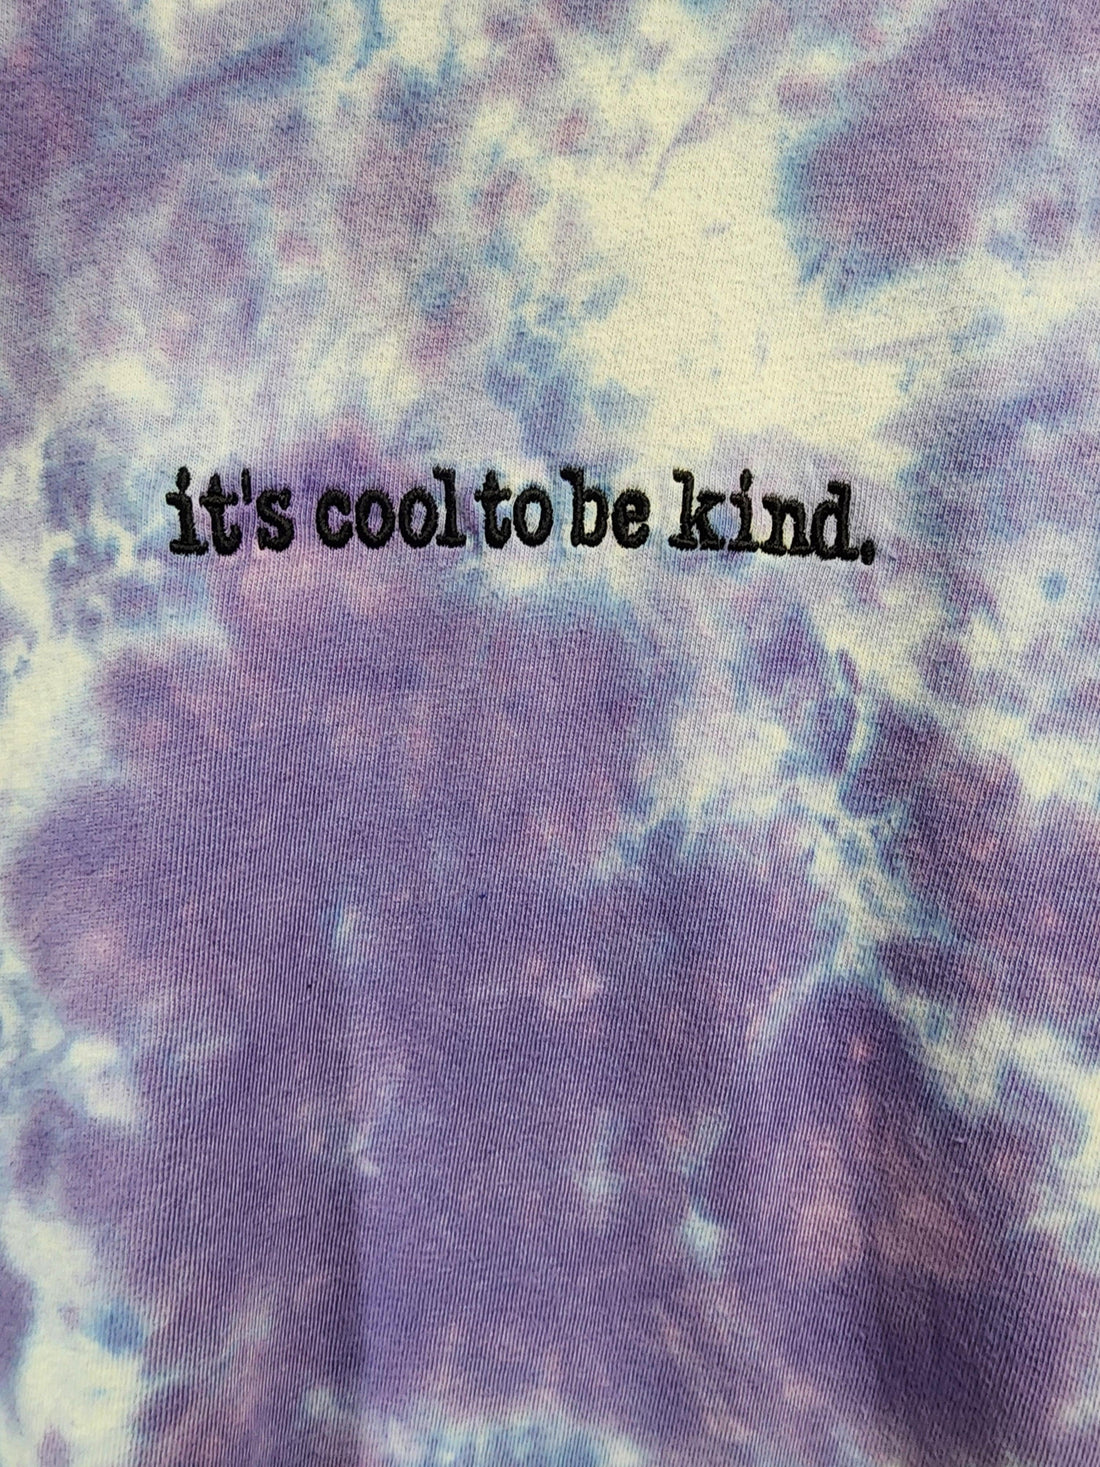 Cool To Be Kind T-Shirt - Random Hippie